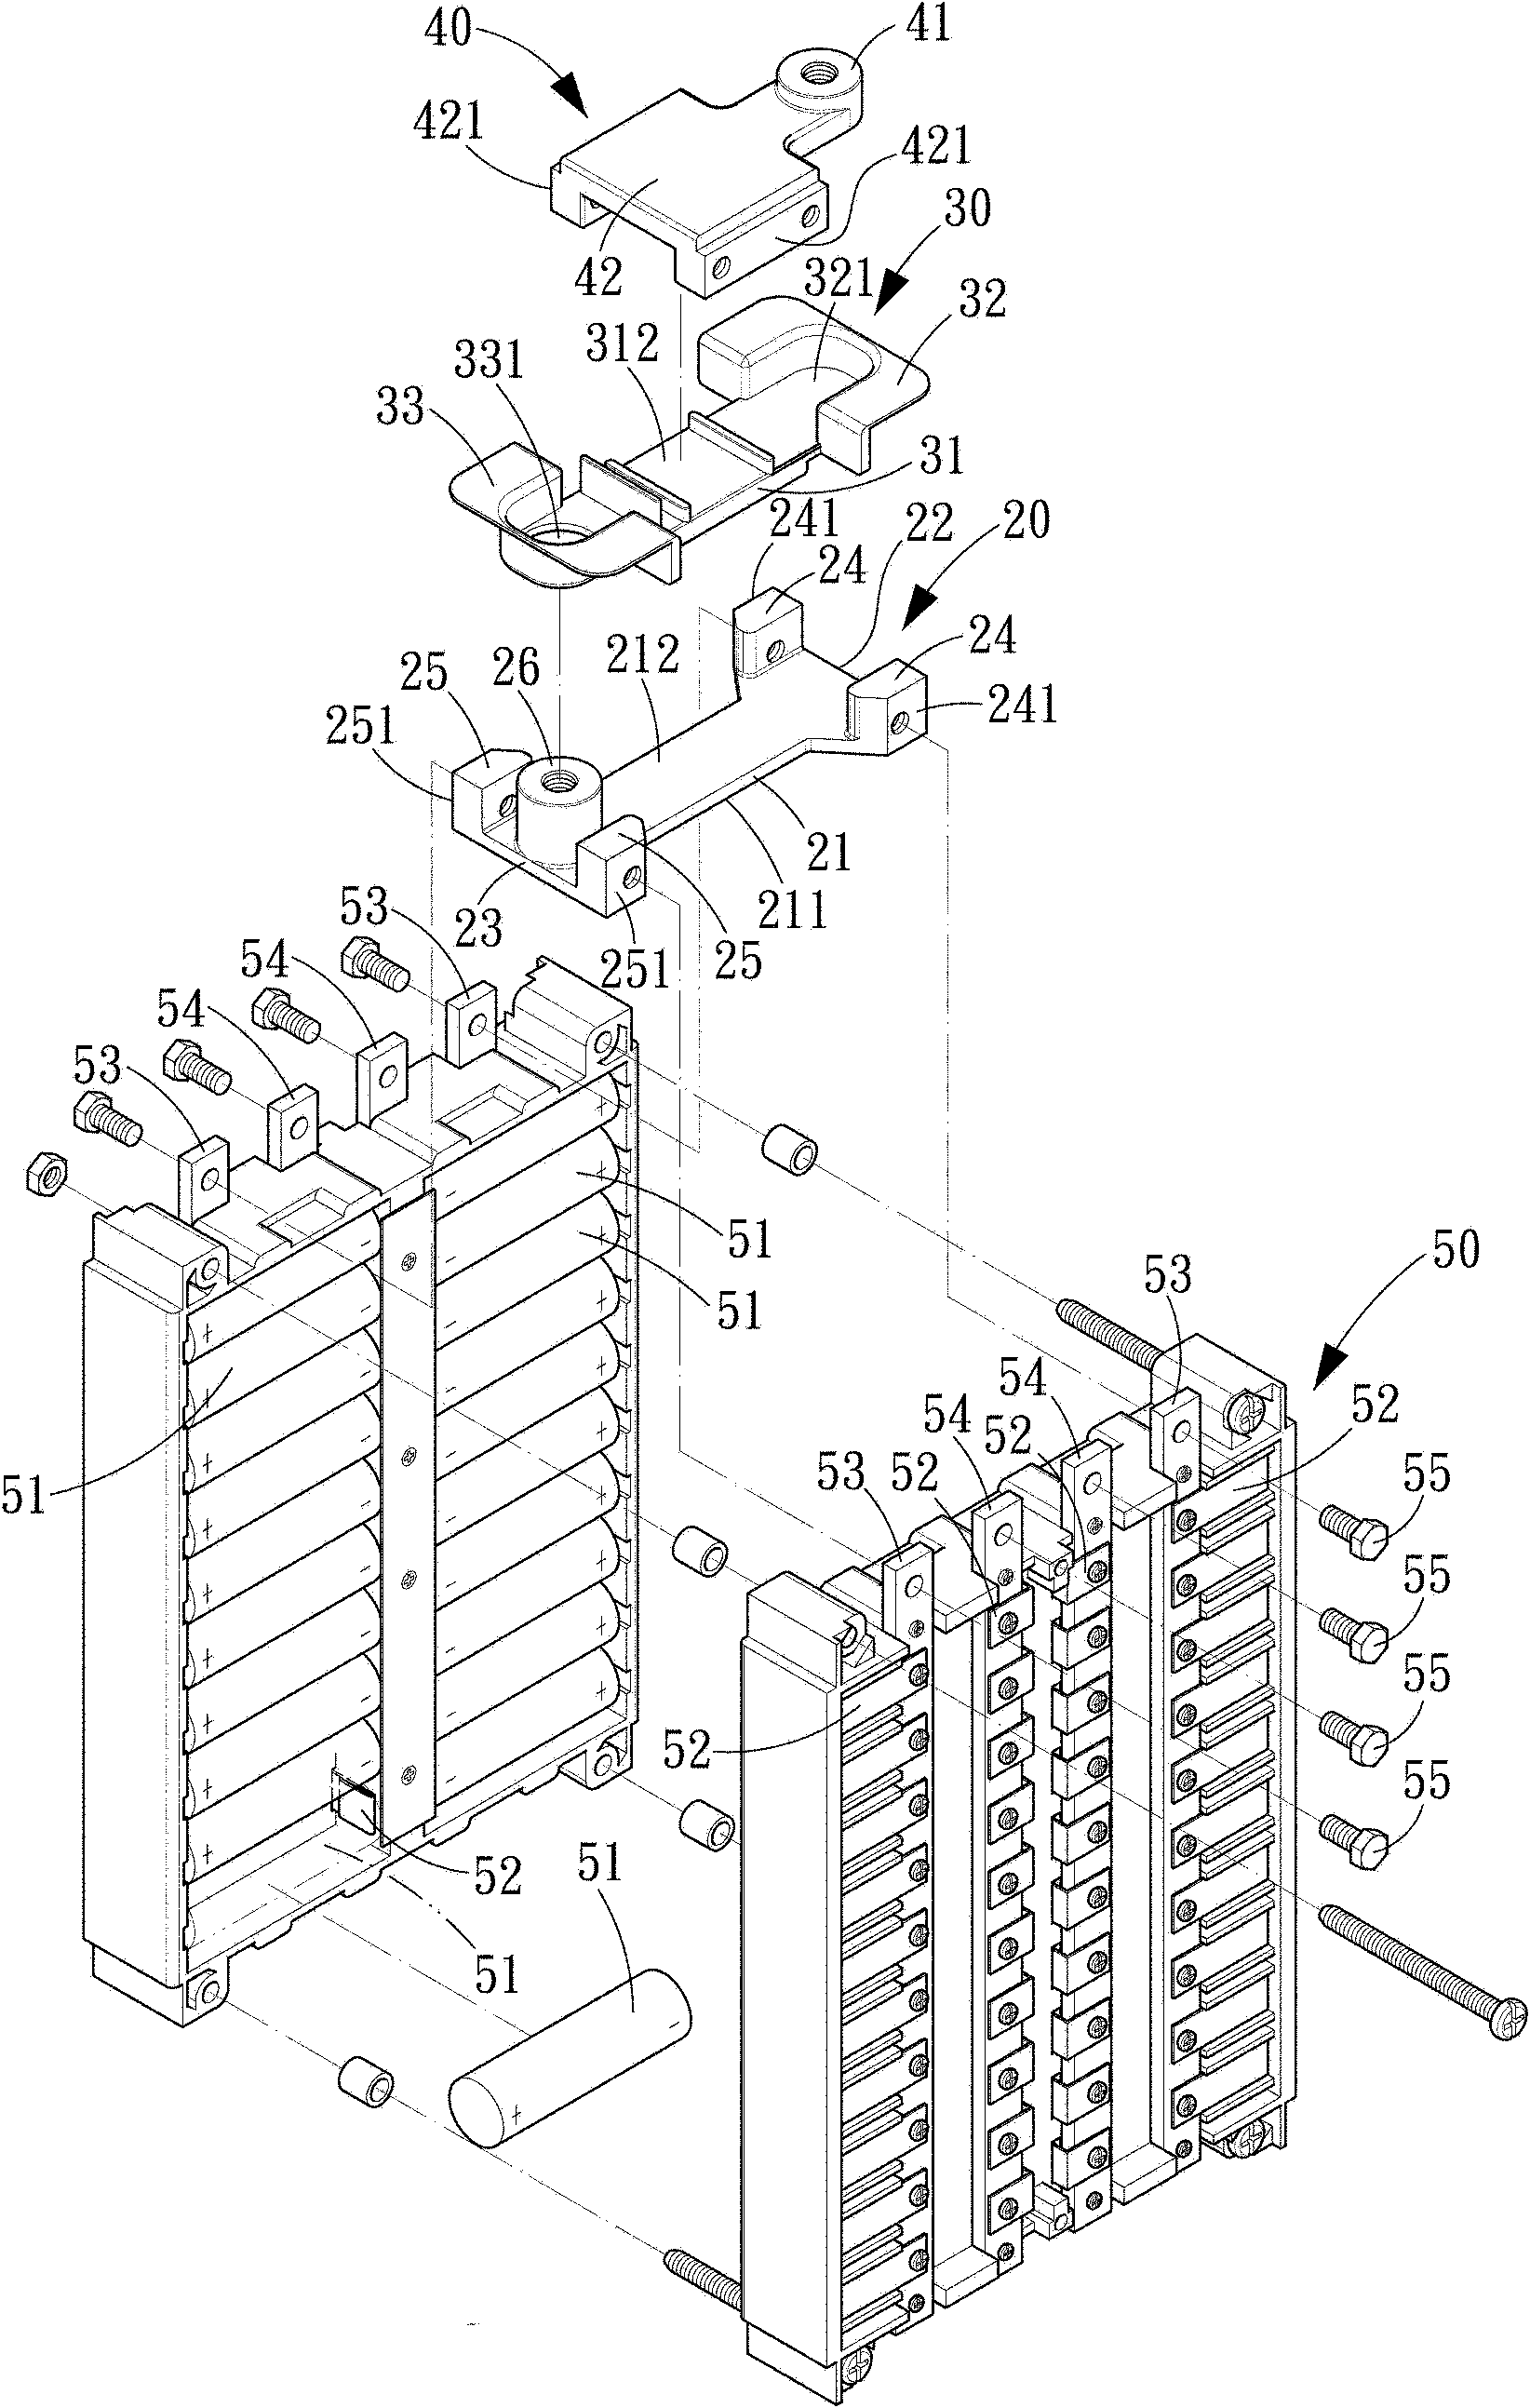 Terminating electrode head structure for assemble cell